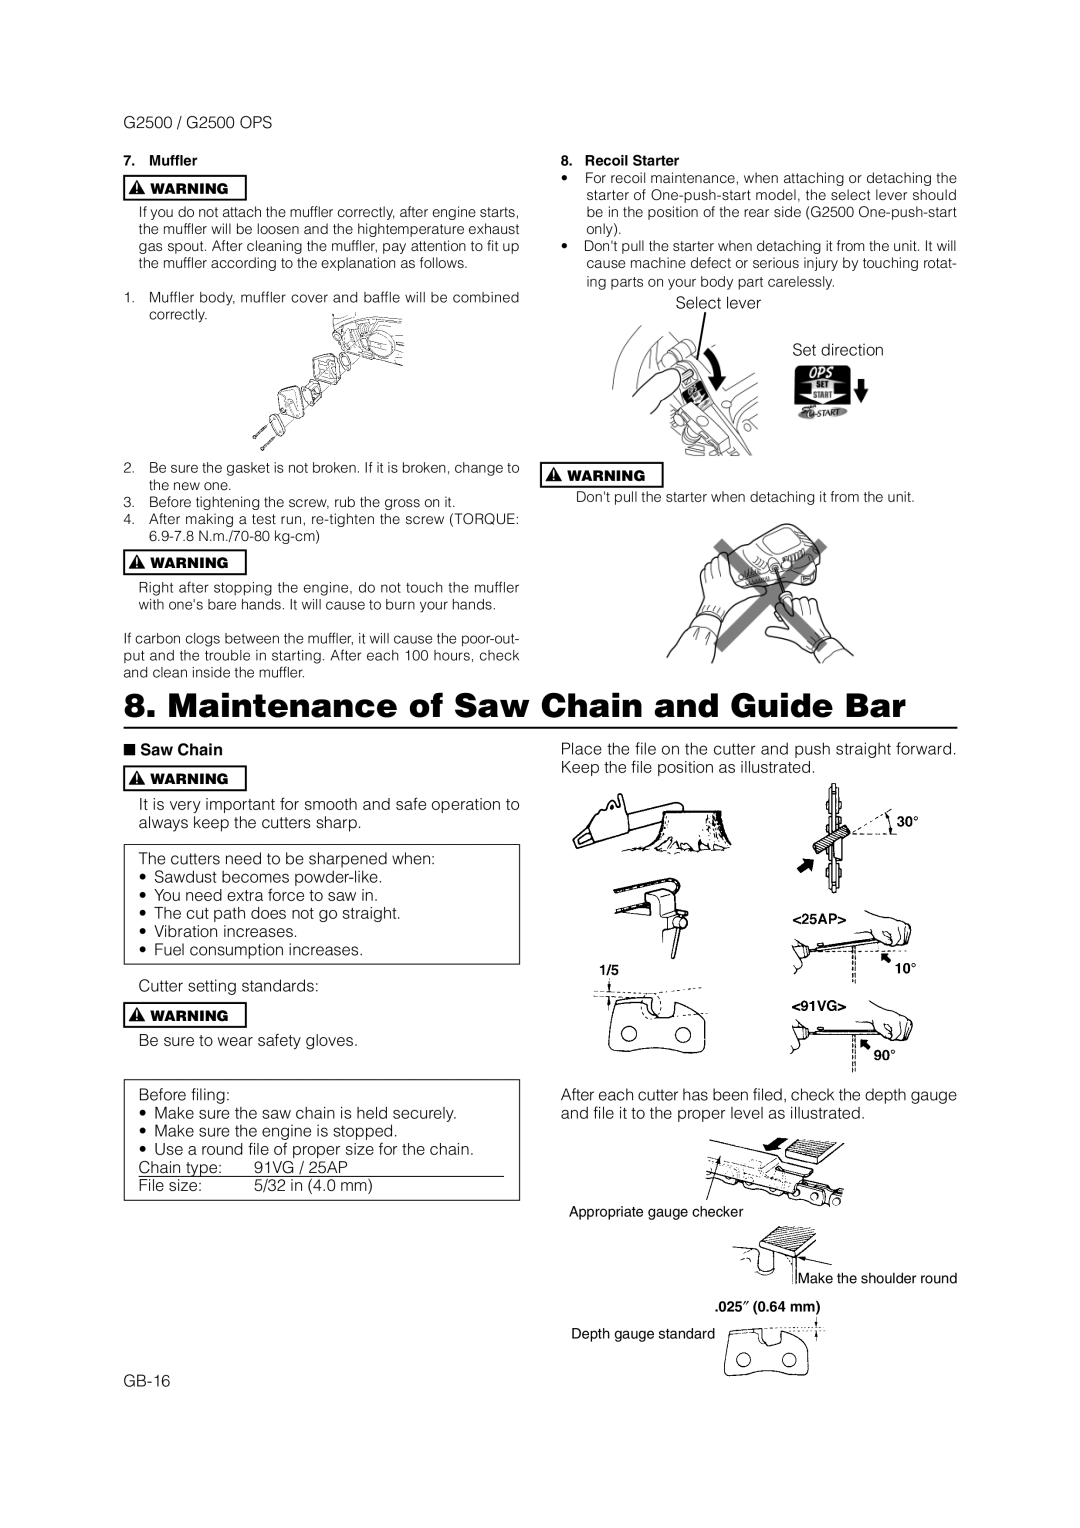 Zenoah G2500 OPS owner manual Maintenance of Saw Chain and Guide Bar 